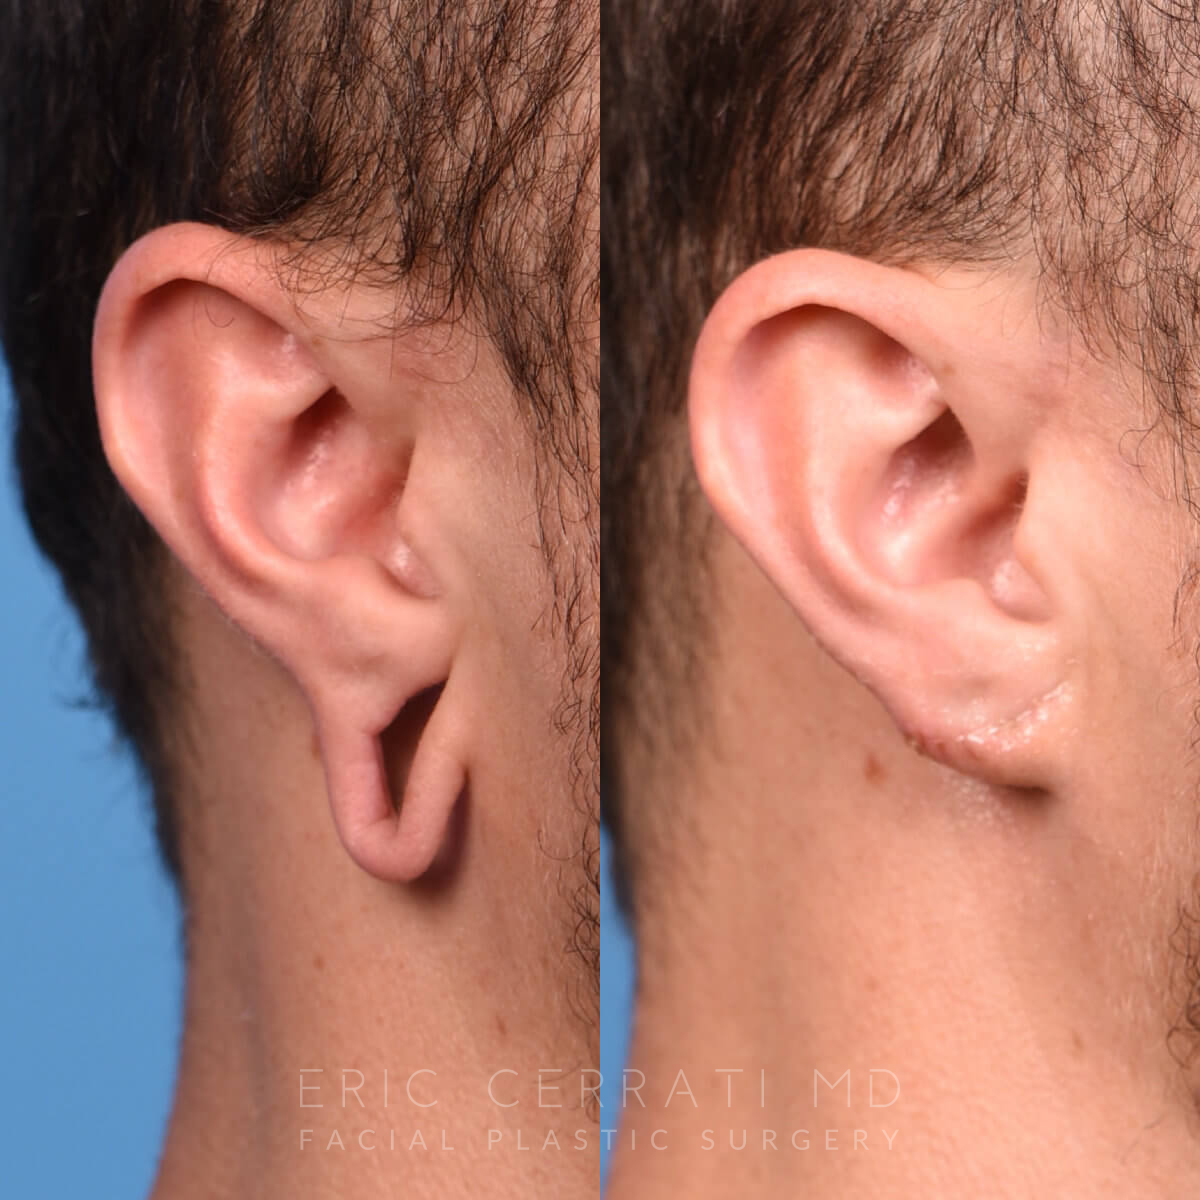 🥇 Treating Stretched or Torn Earlobes